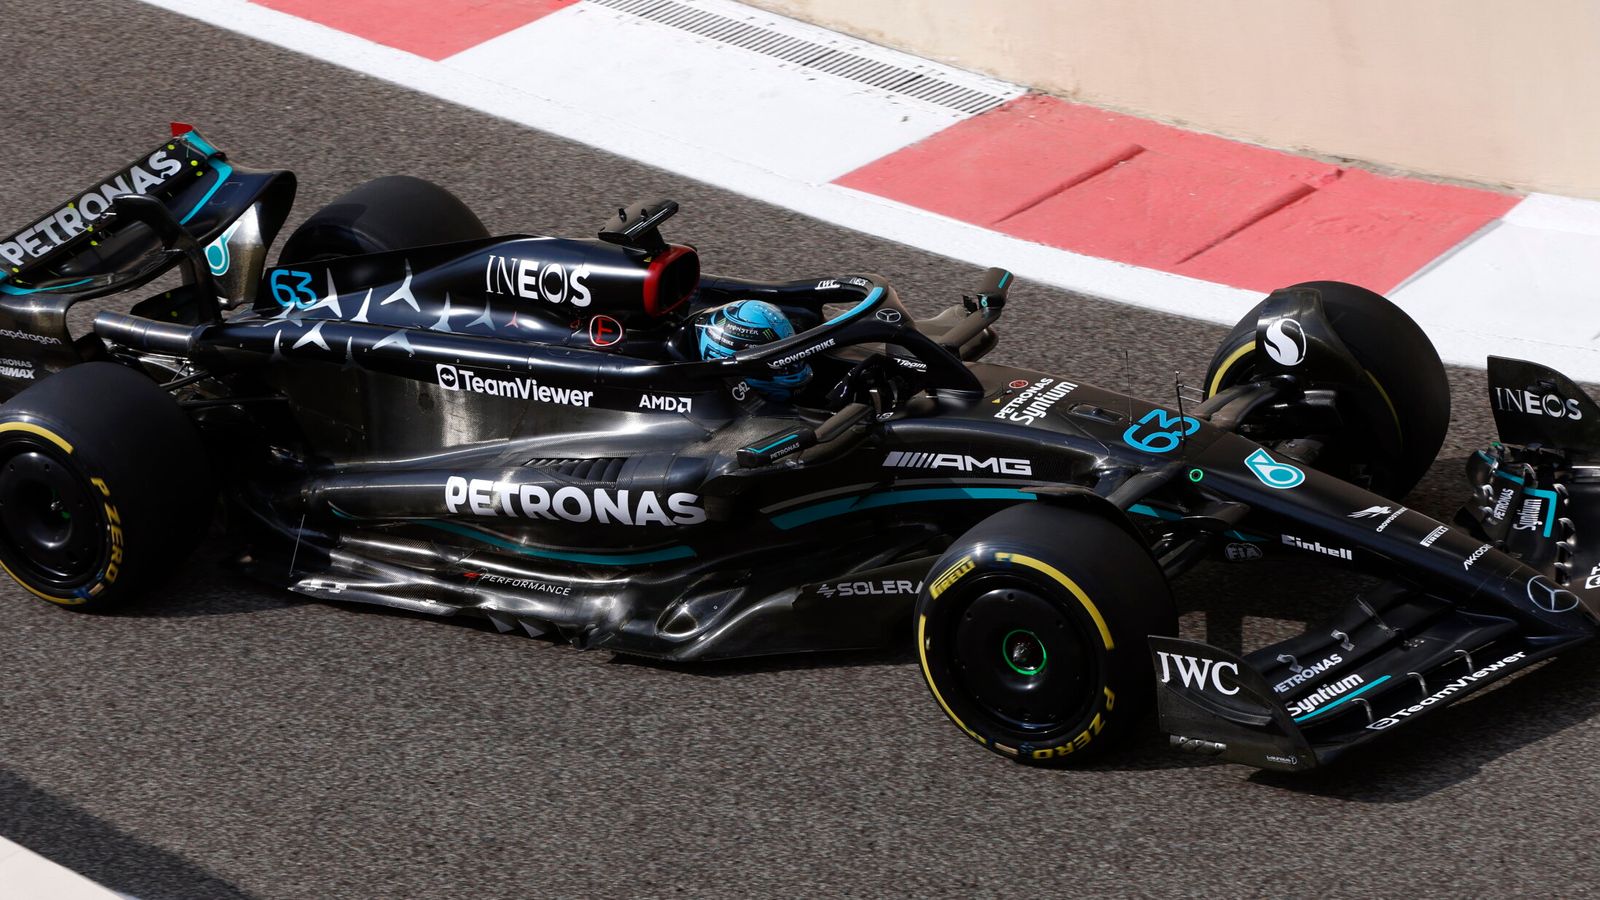 Abu Dhabi GP: FP1: George Russell leads prime rookie Felipe Drugovich in first session at Yas Marina Circuit